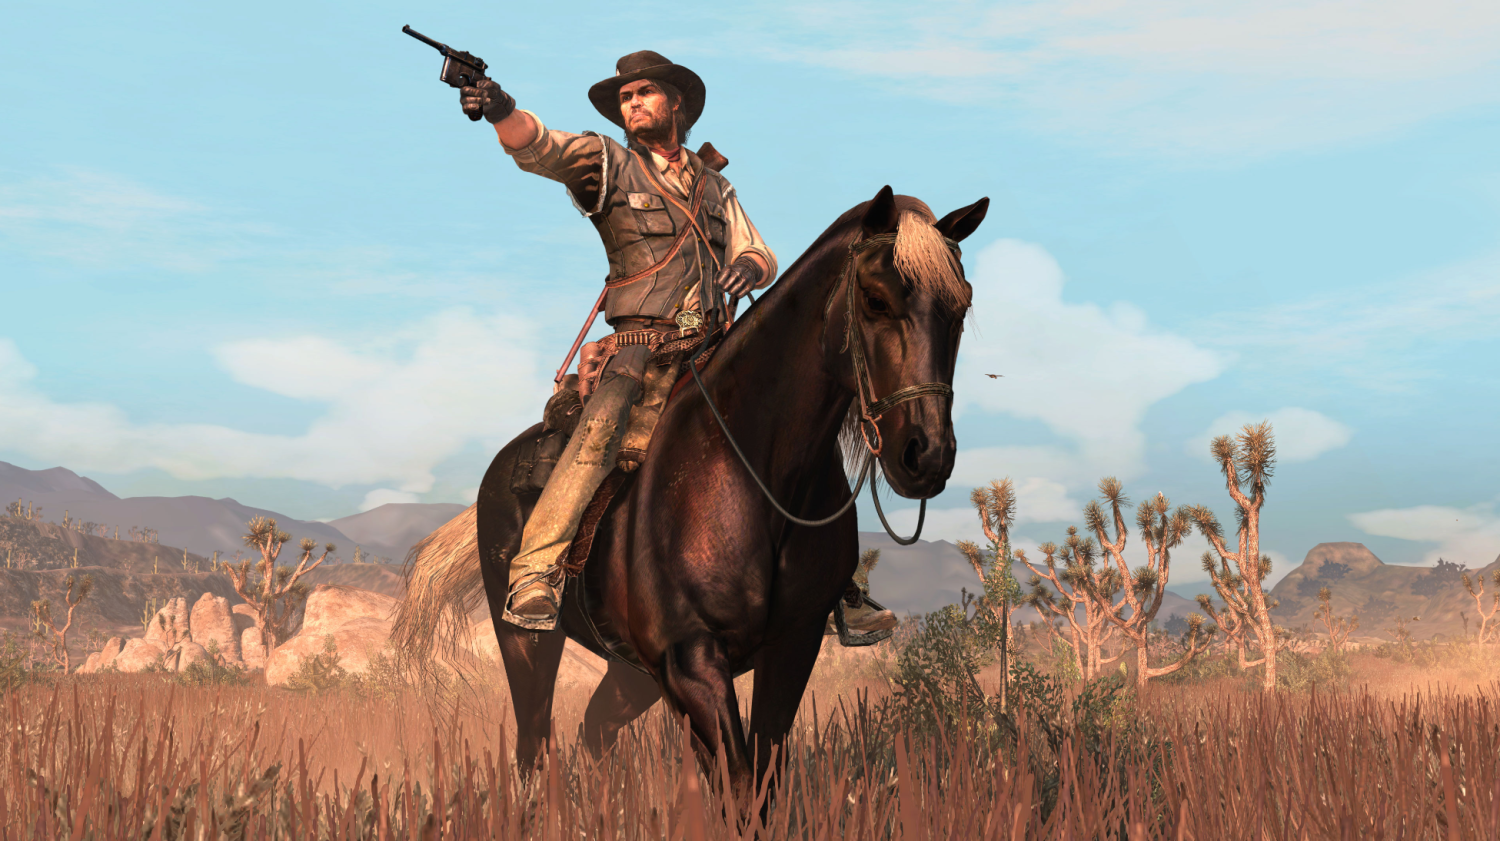 Red Dead Redemption 2 PC Tech Analysis, Comparison With PS4 Pro And More